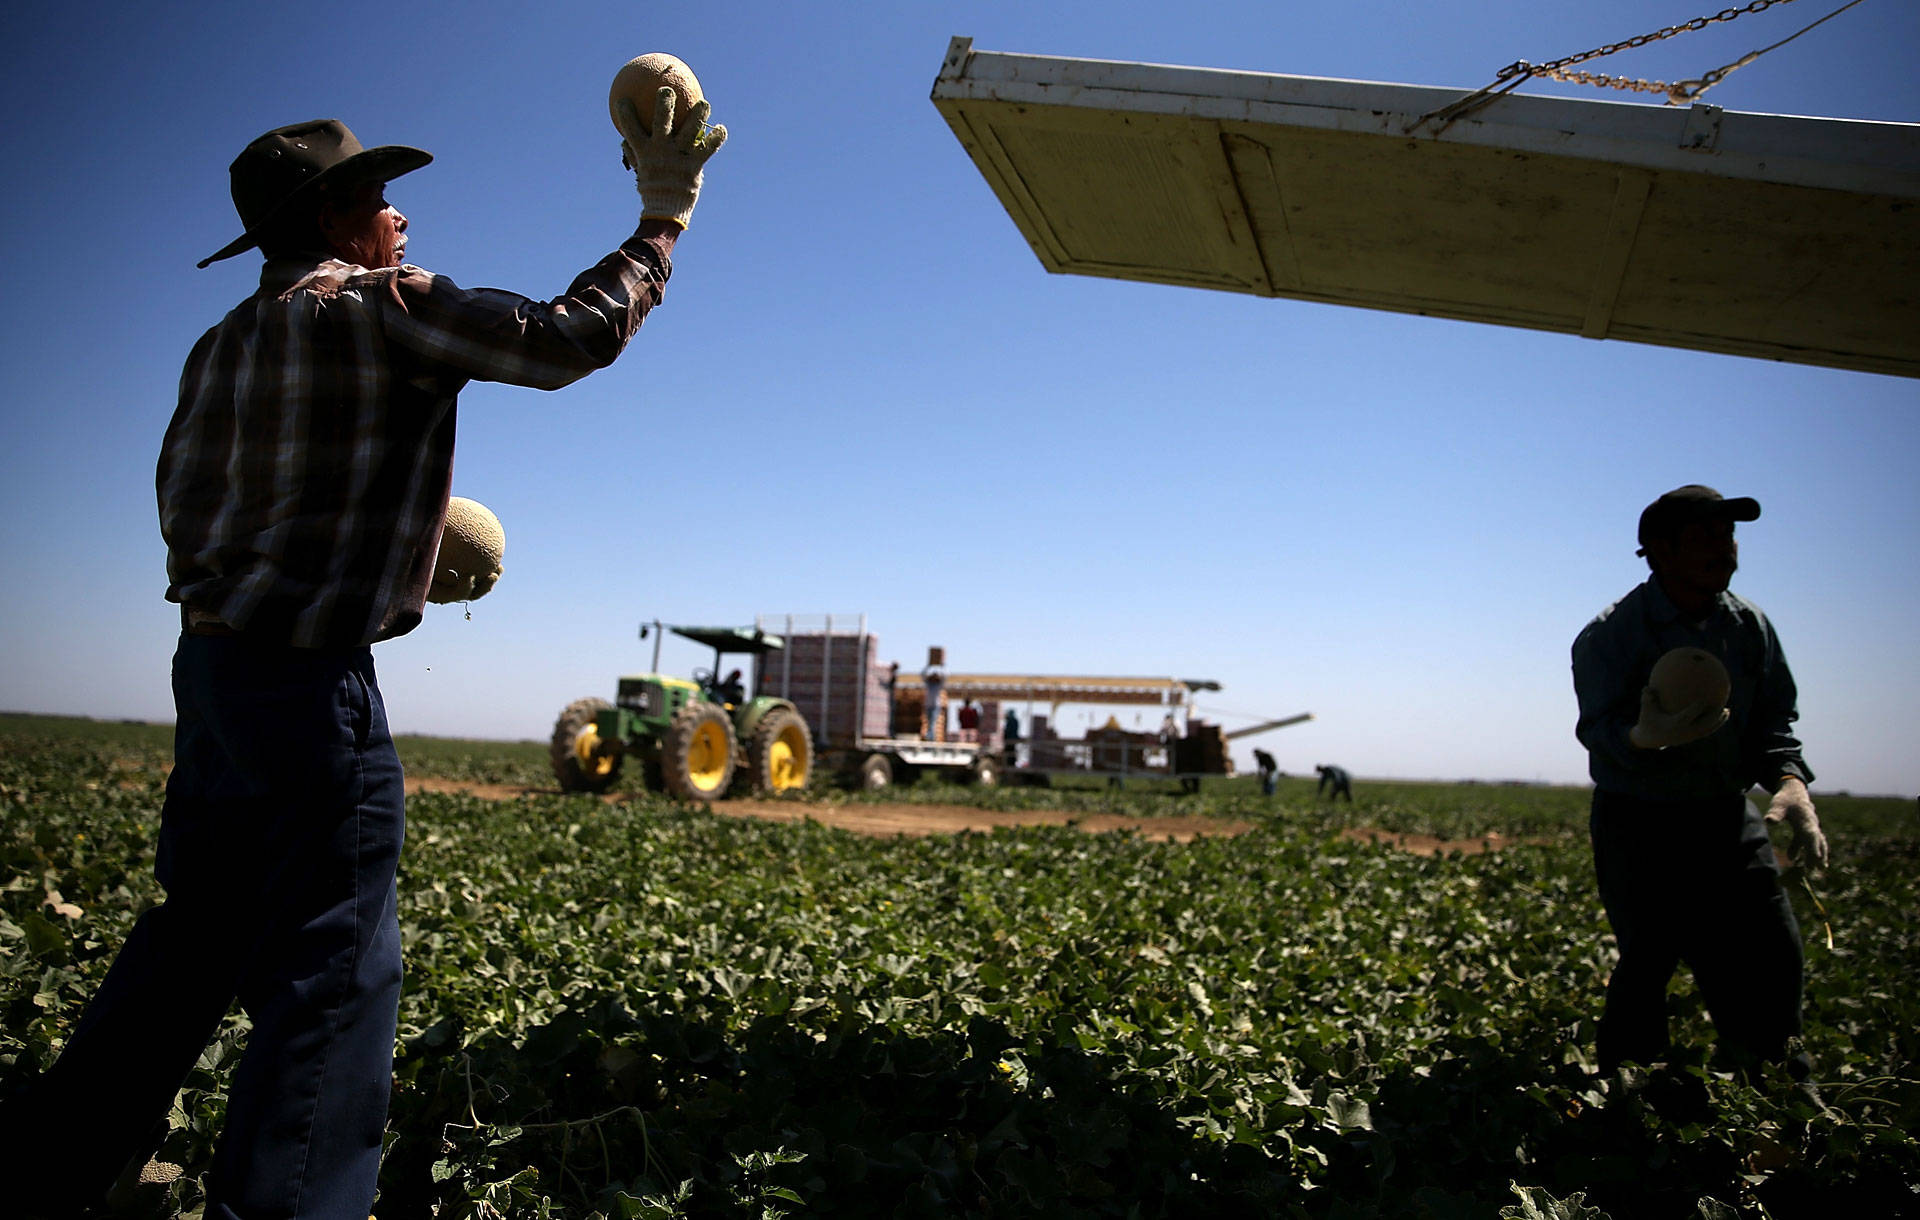 A worker harvests cantaloupes on a farm on August 22, 2014 near the Central Valley town of Firebaugh. Justin Sullivan/Getty Images